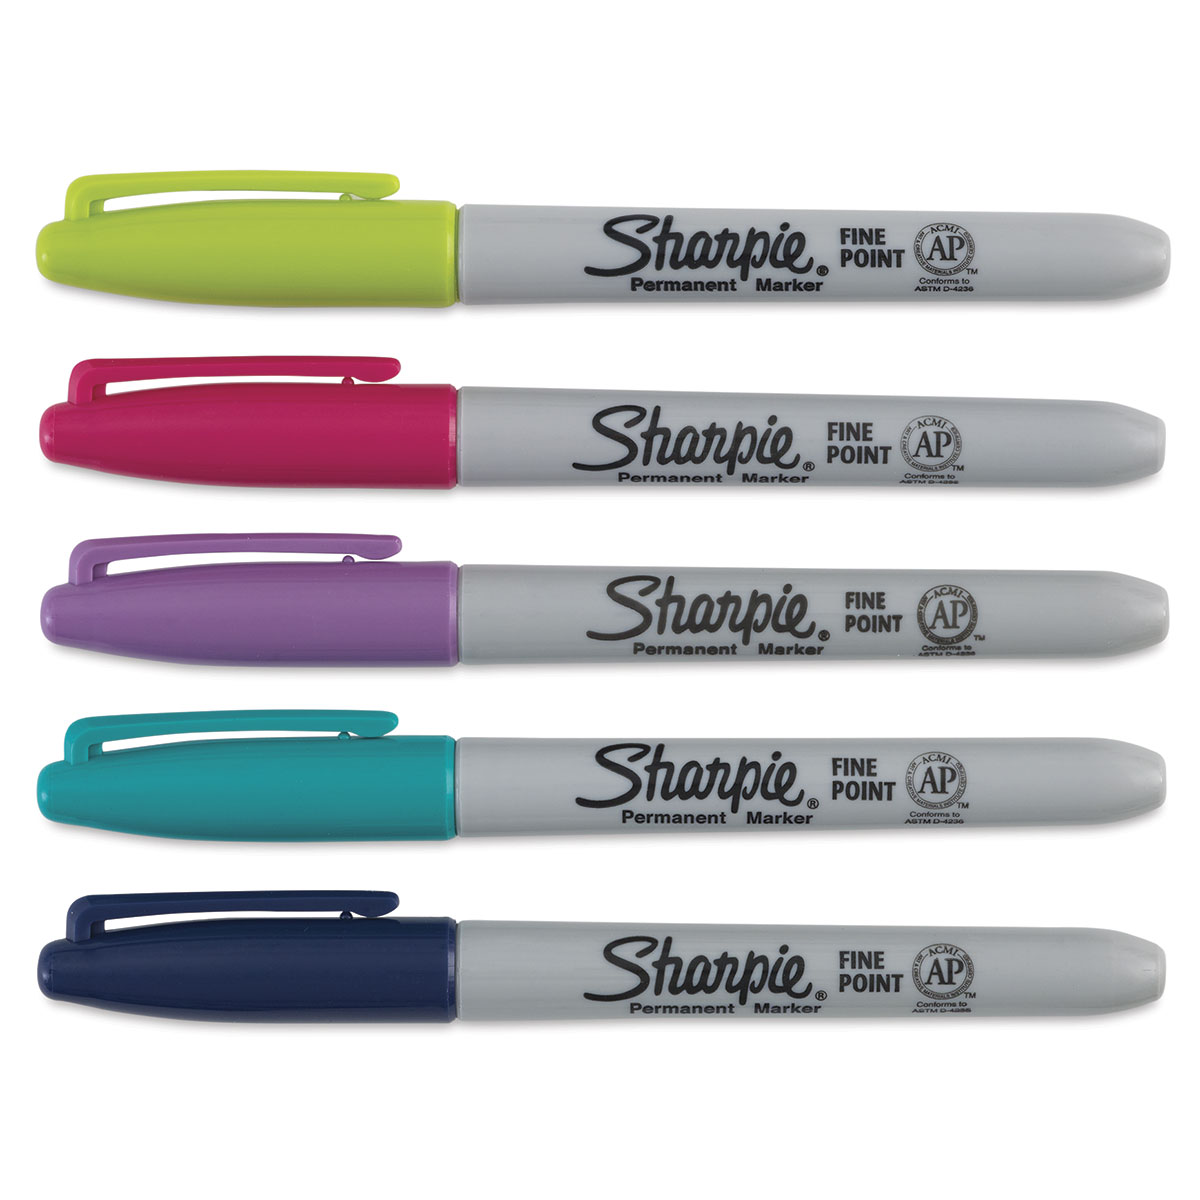 Sharpie Fine Point Permanent Markers - Cosmic Colors, Set of 12